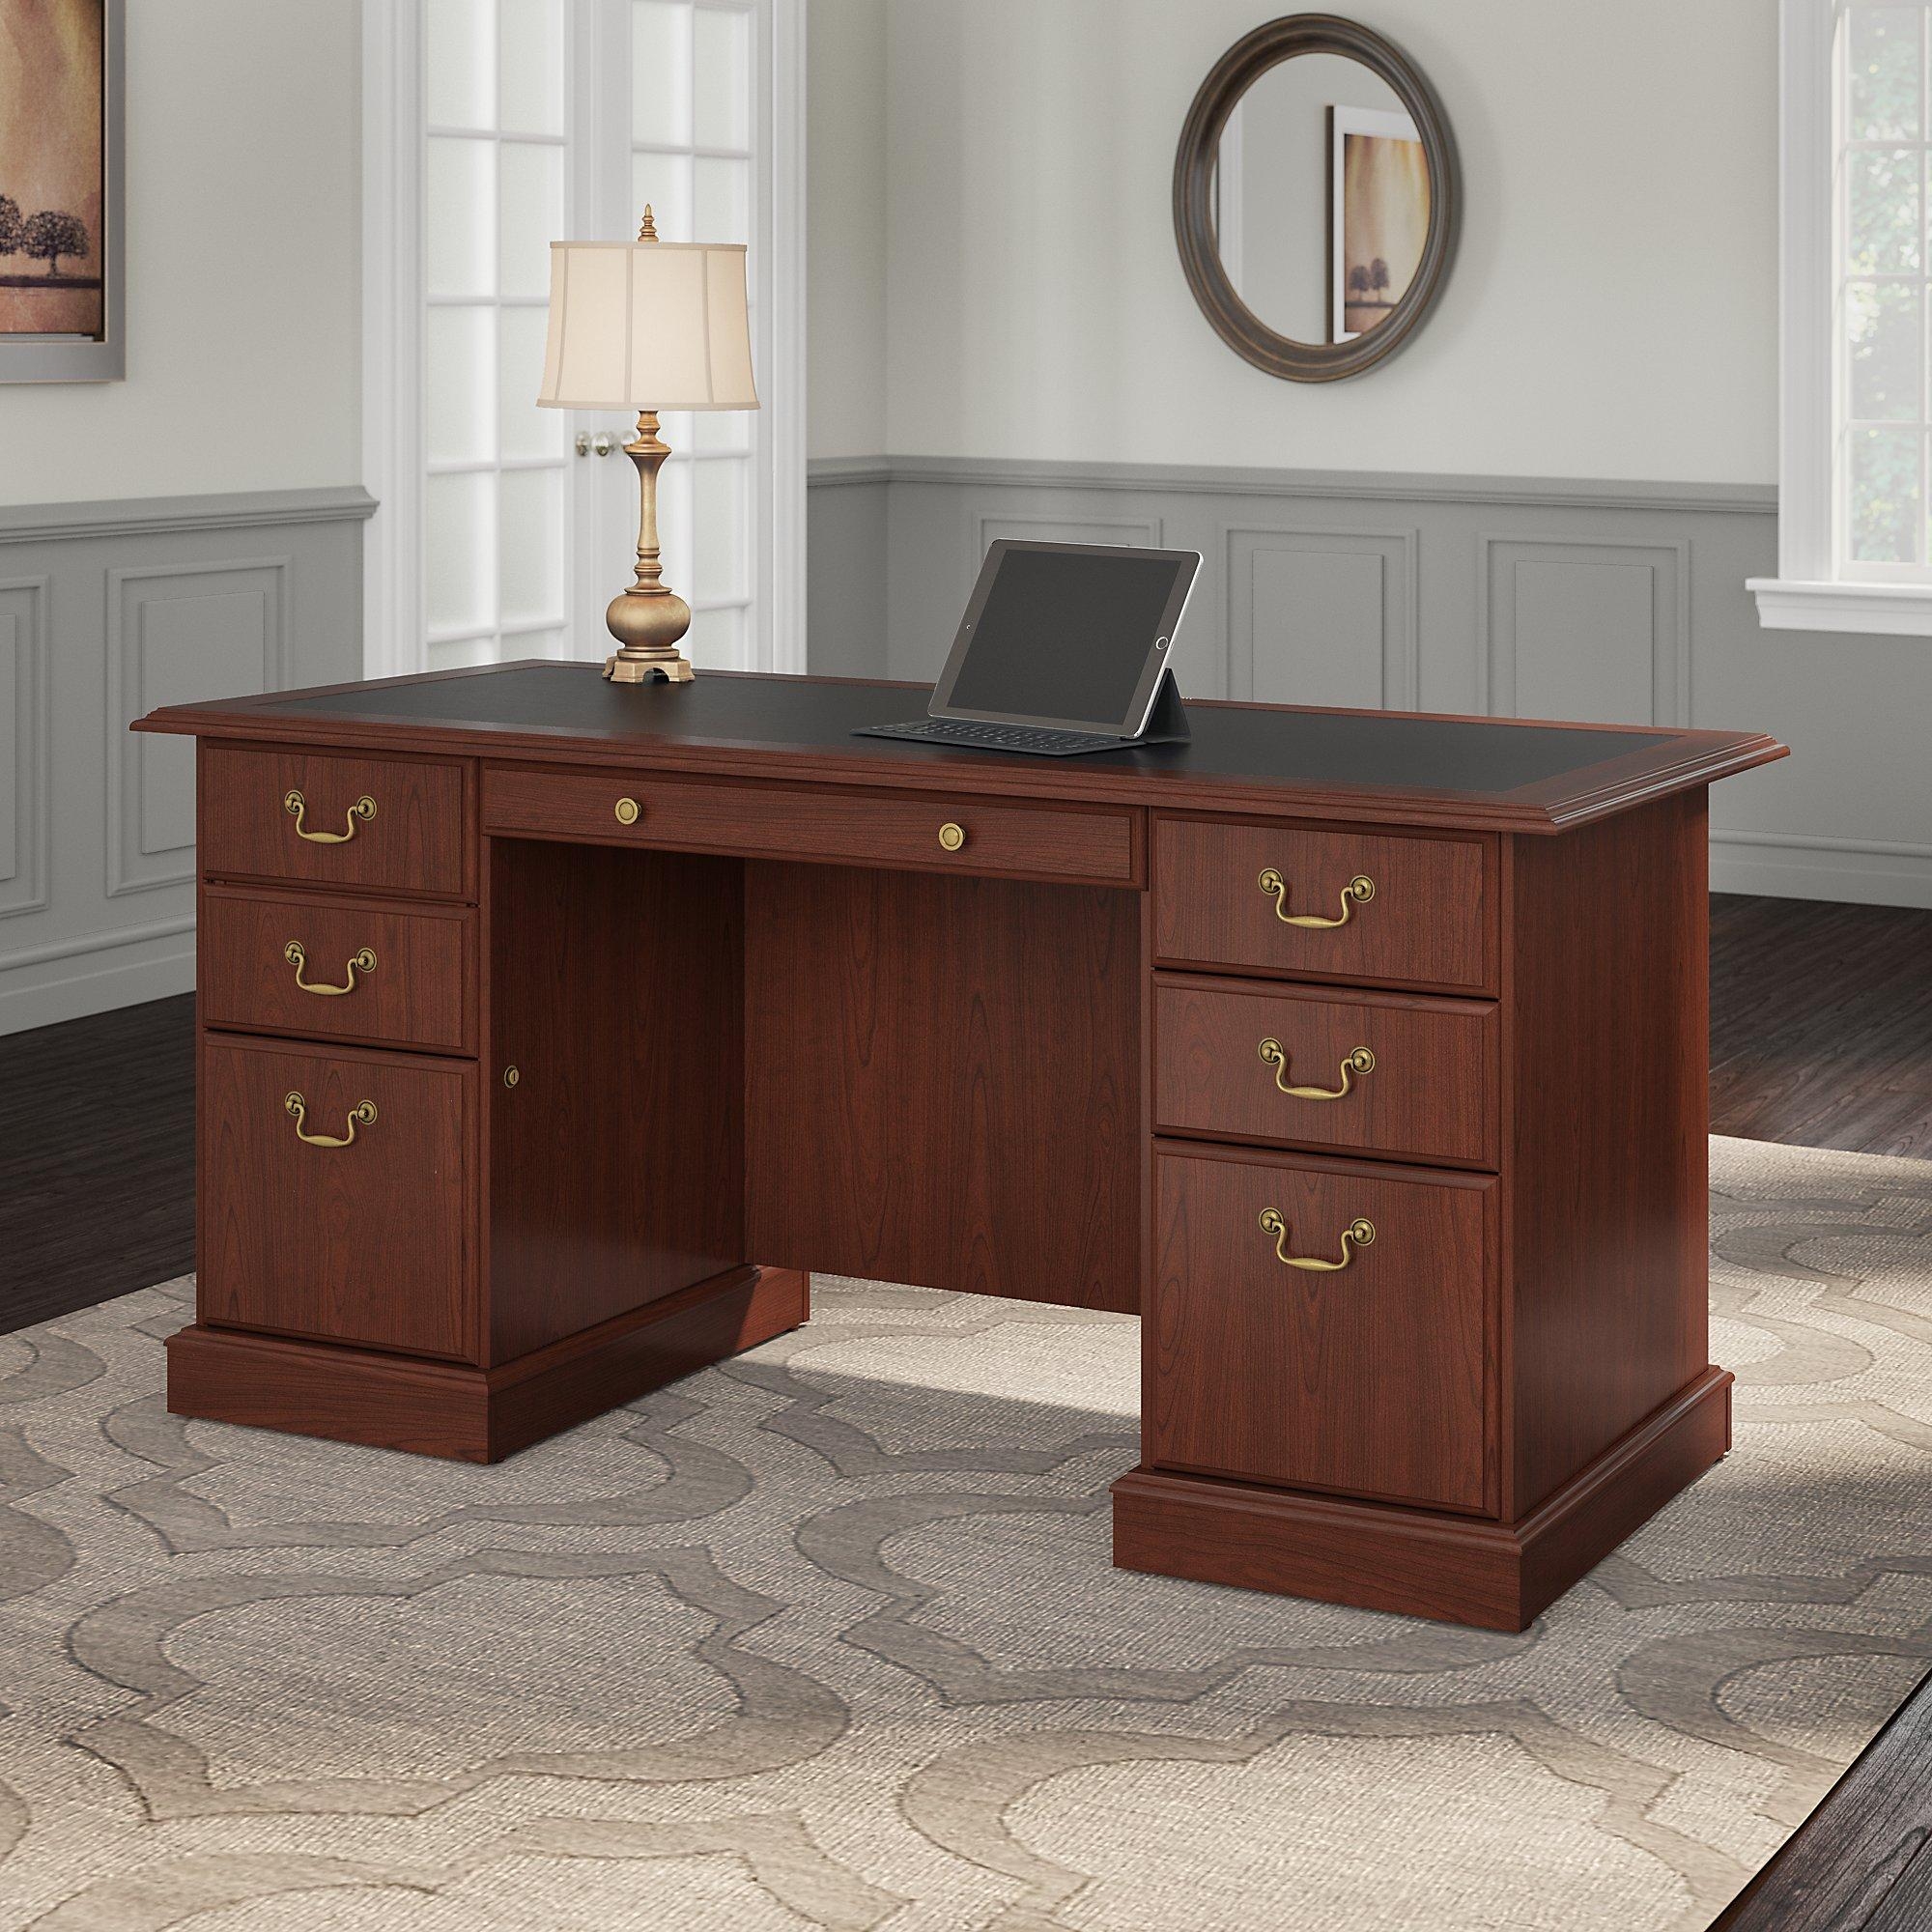 50 Executive Desk You Ll Love In 2020 Visual Hunt